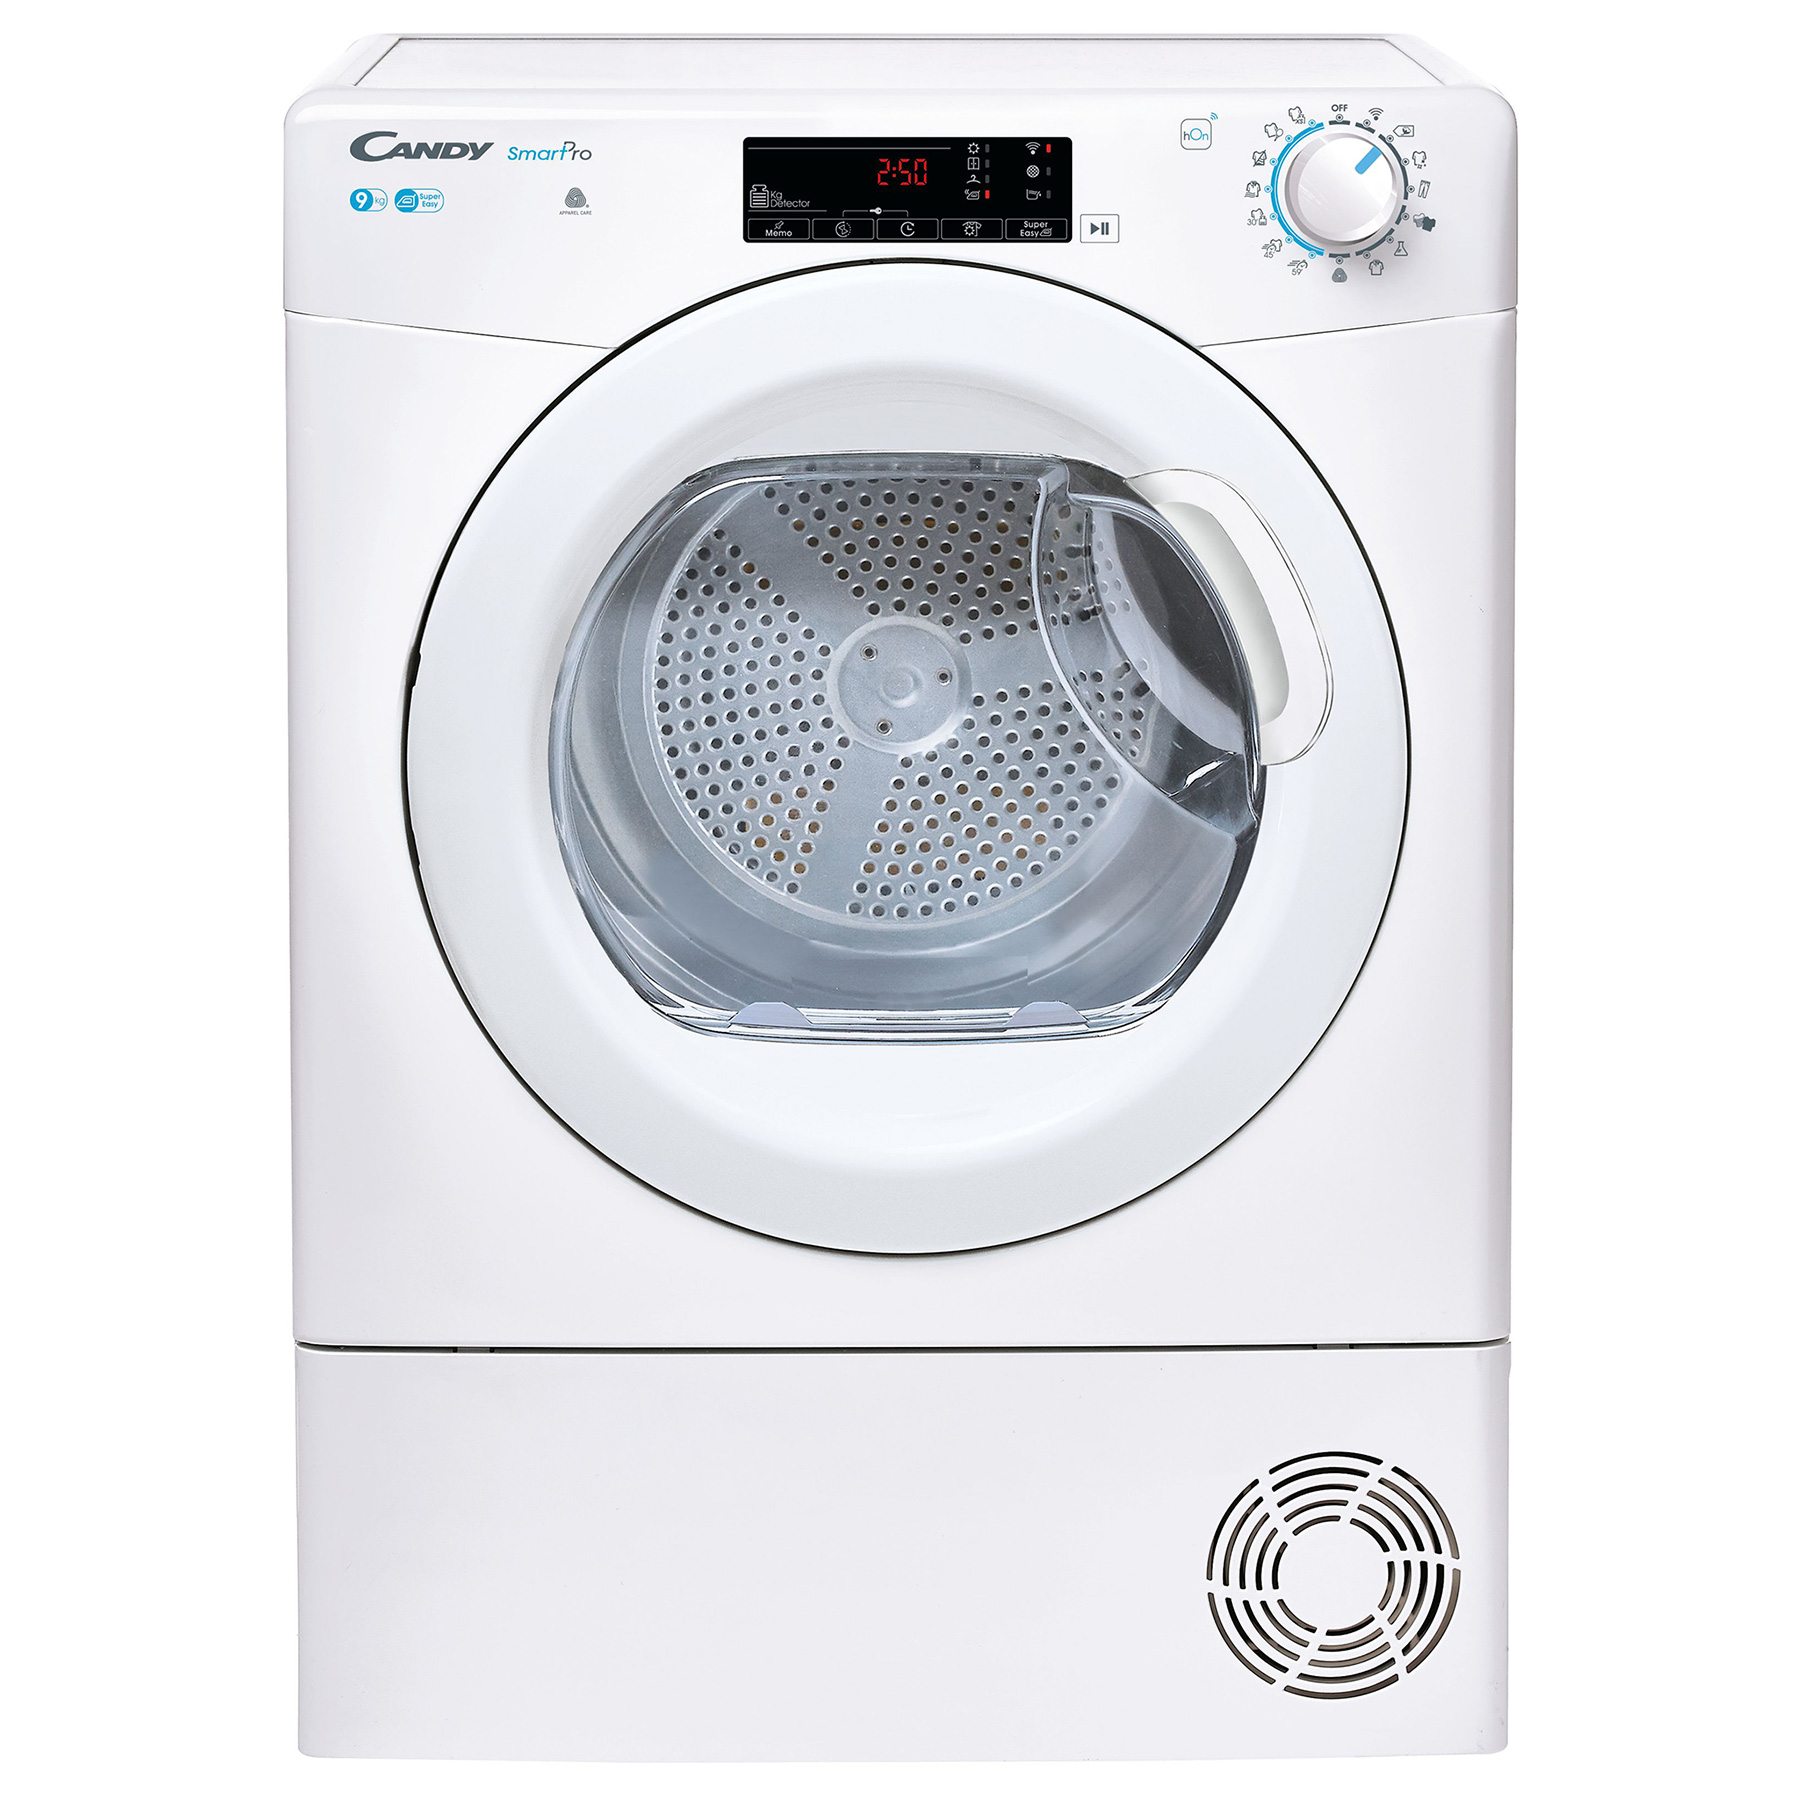 Image of Candy CSOEC9TG 9kg Condenser Dryer in White B Rated Sensor Dry Wi Fi